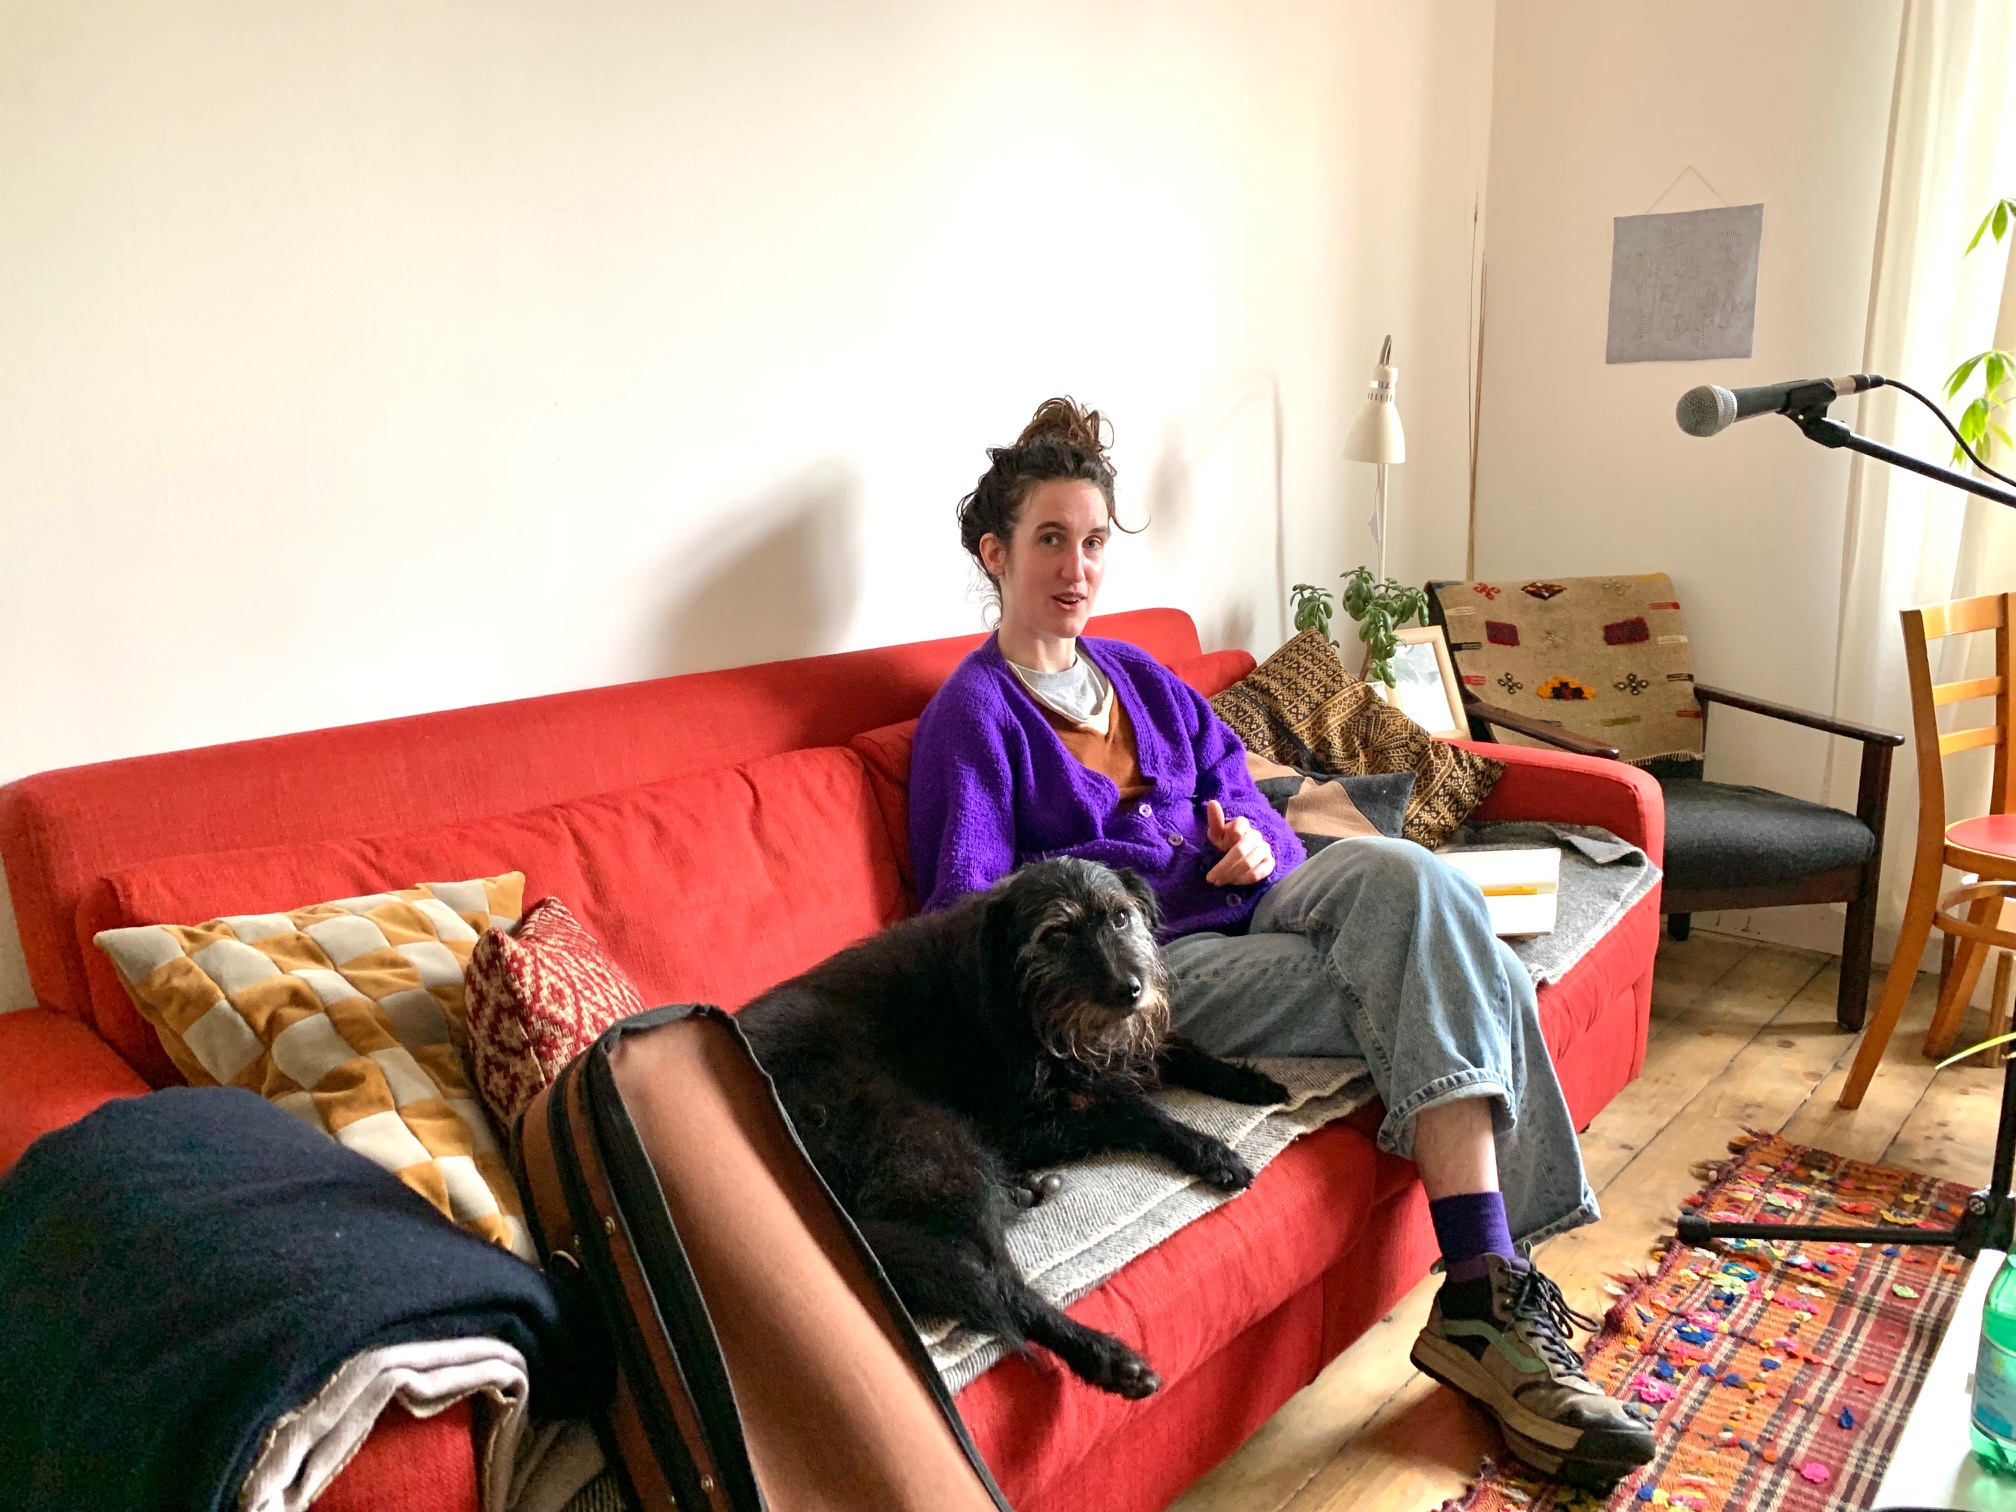 A photo of a person and dog sitting on a red couch